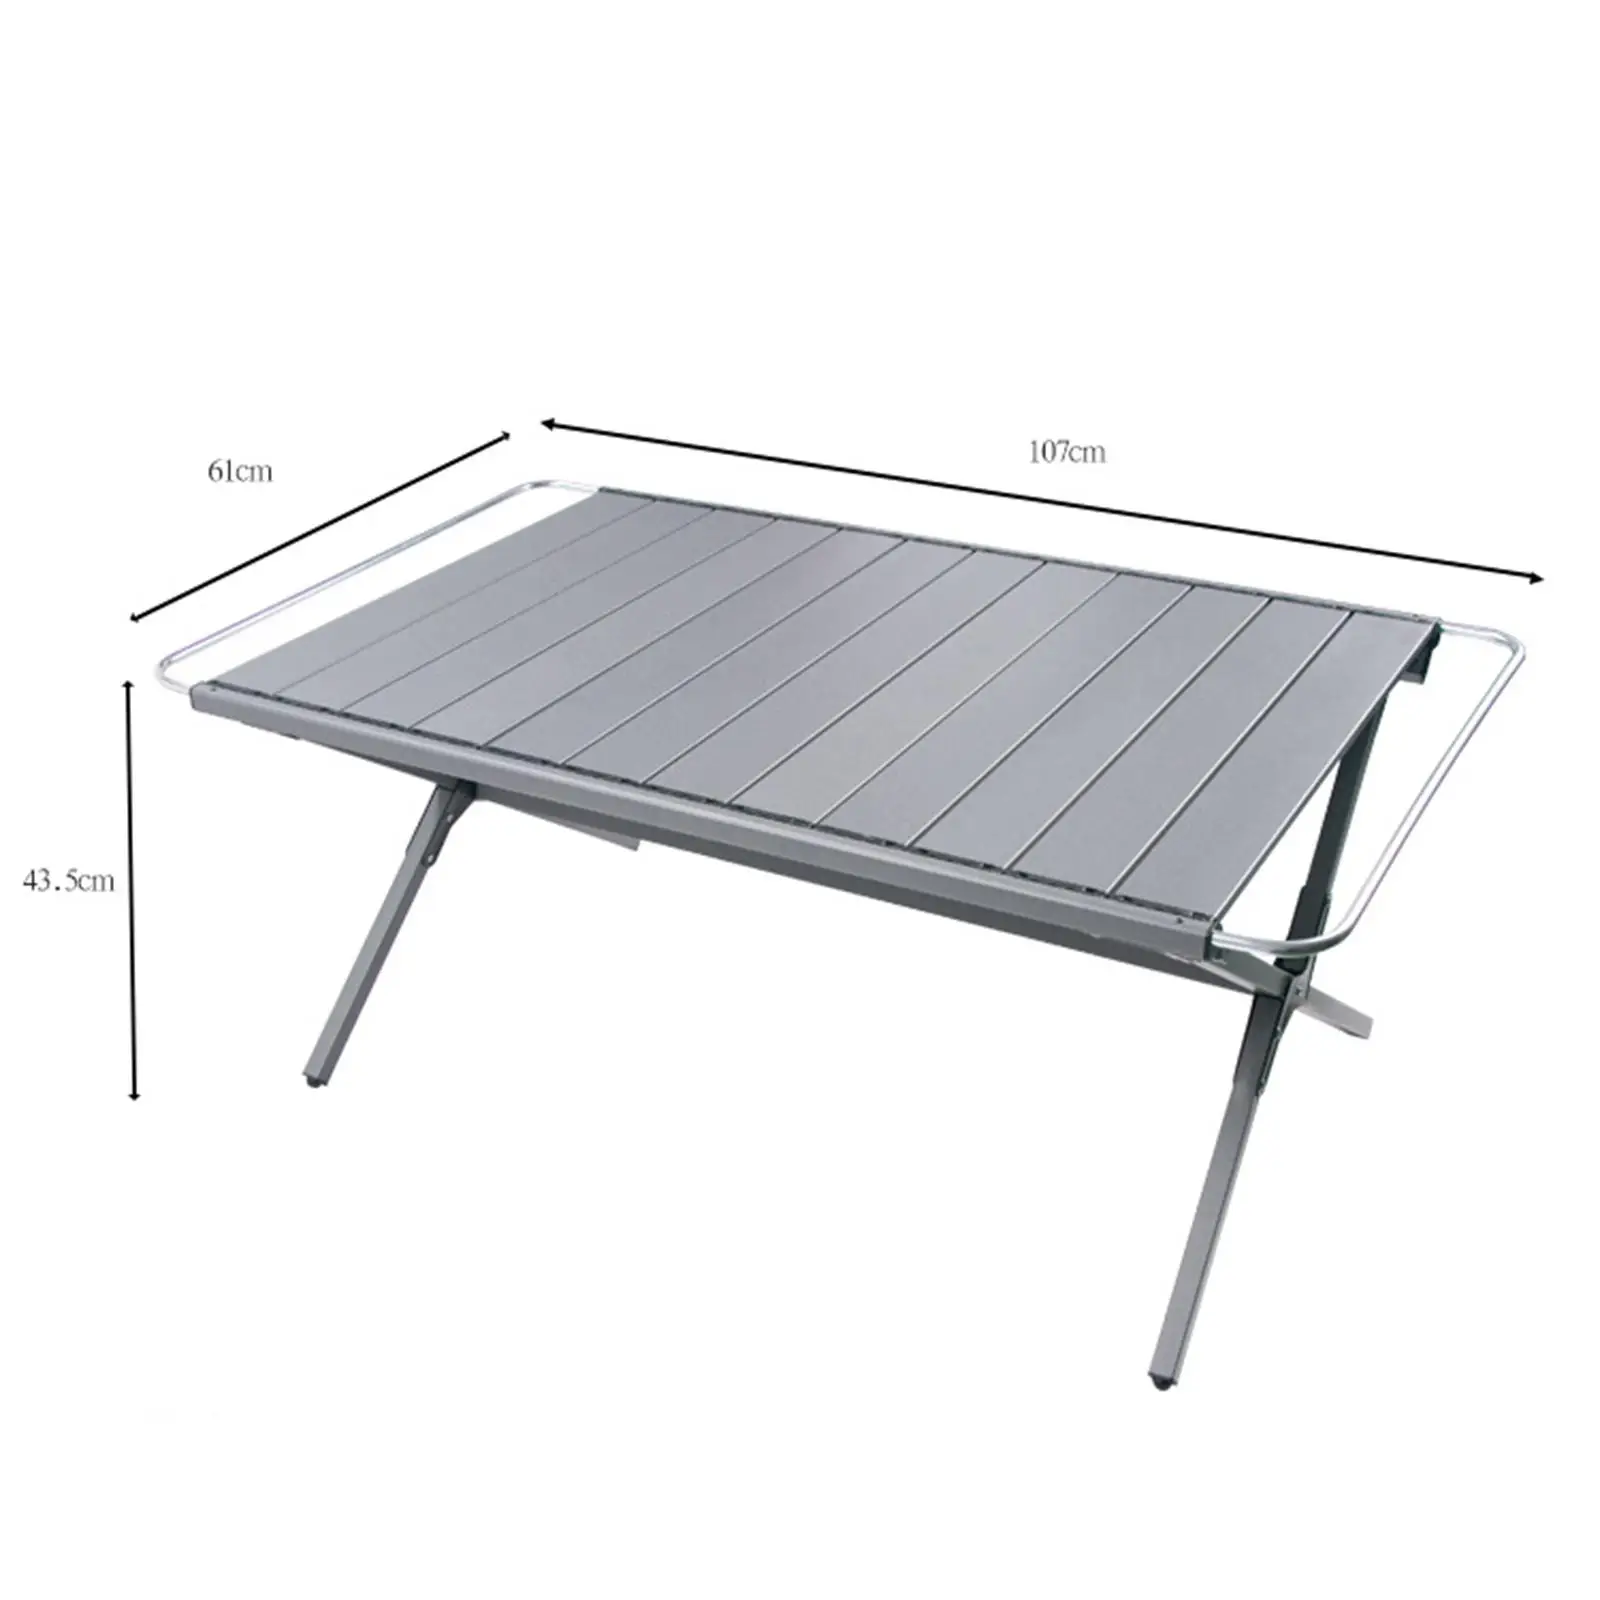 Folding Camping Table Camp Table Folding Table Travel Table Picnic Table with Storage Bag for Balcony Party Garden Hiking BBQ